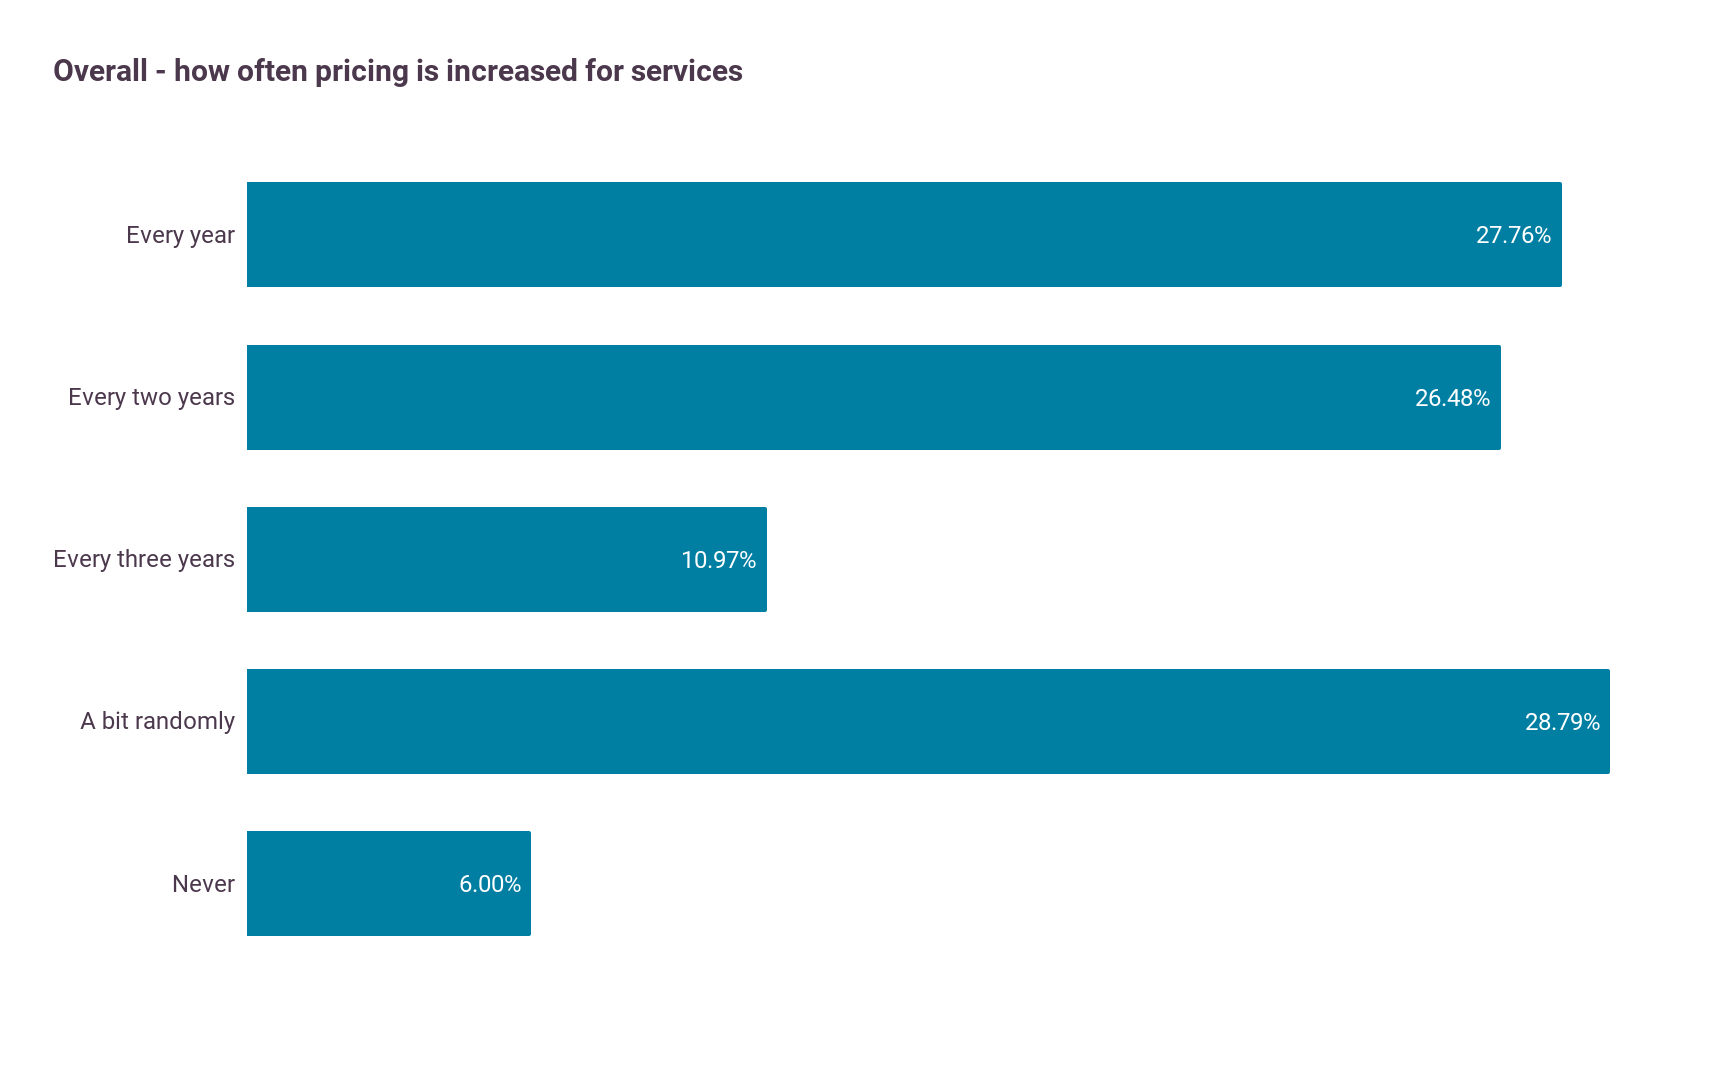 How often respondents increase prices for their services. The largest response was 'was a bit randomly' at 28.79%.